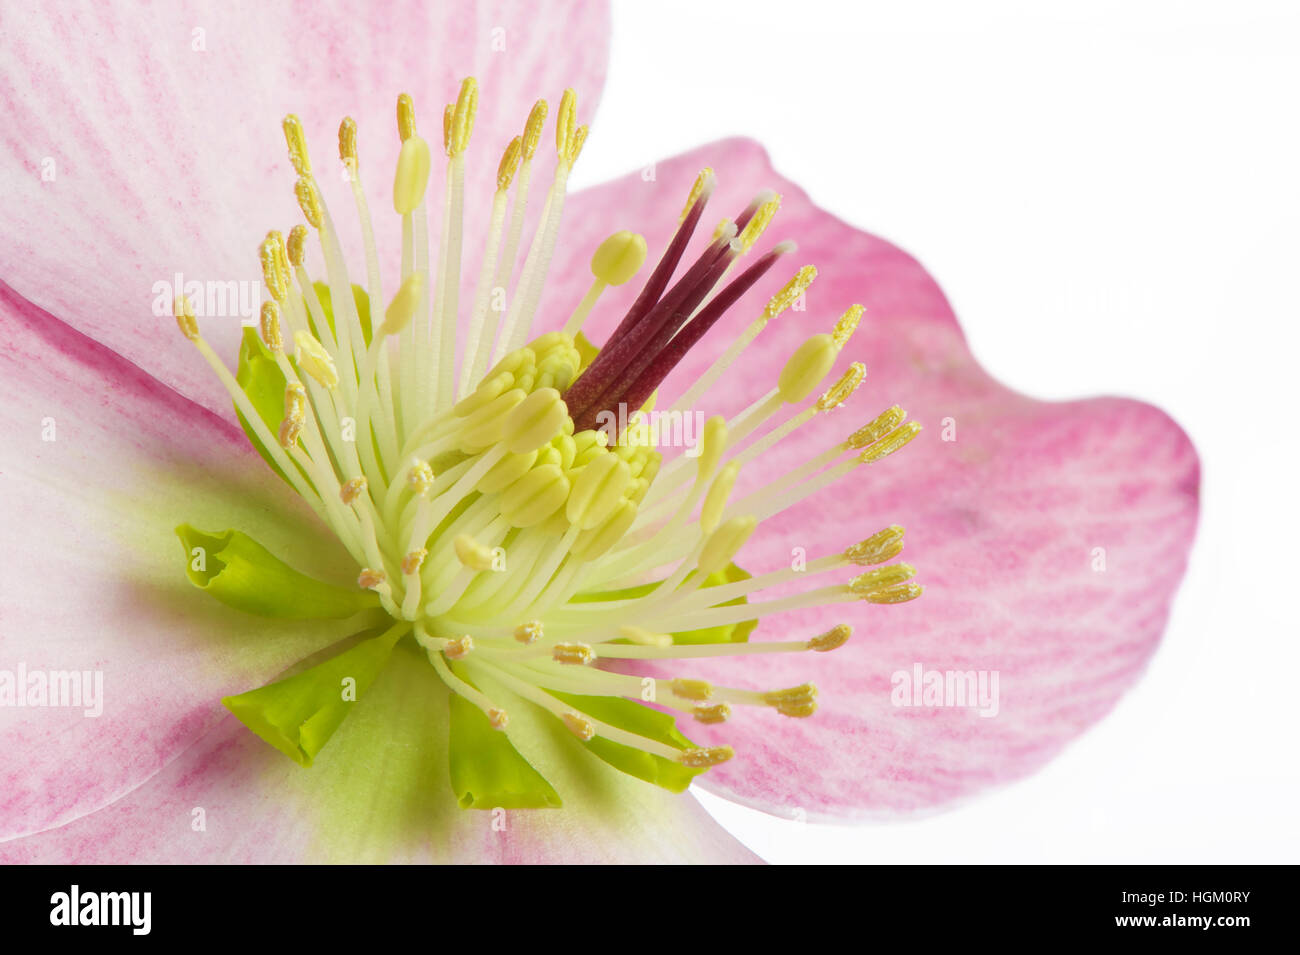 high-key image of a spring Hellebore flower also known as the Lenten or Christmas Rose, image taken against a white background Stock Photo